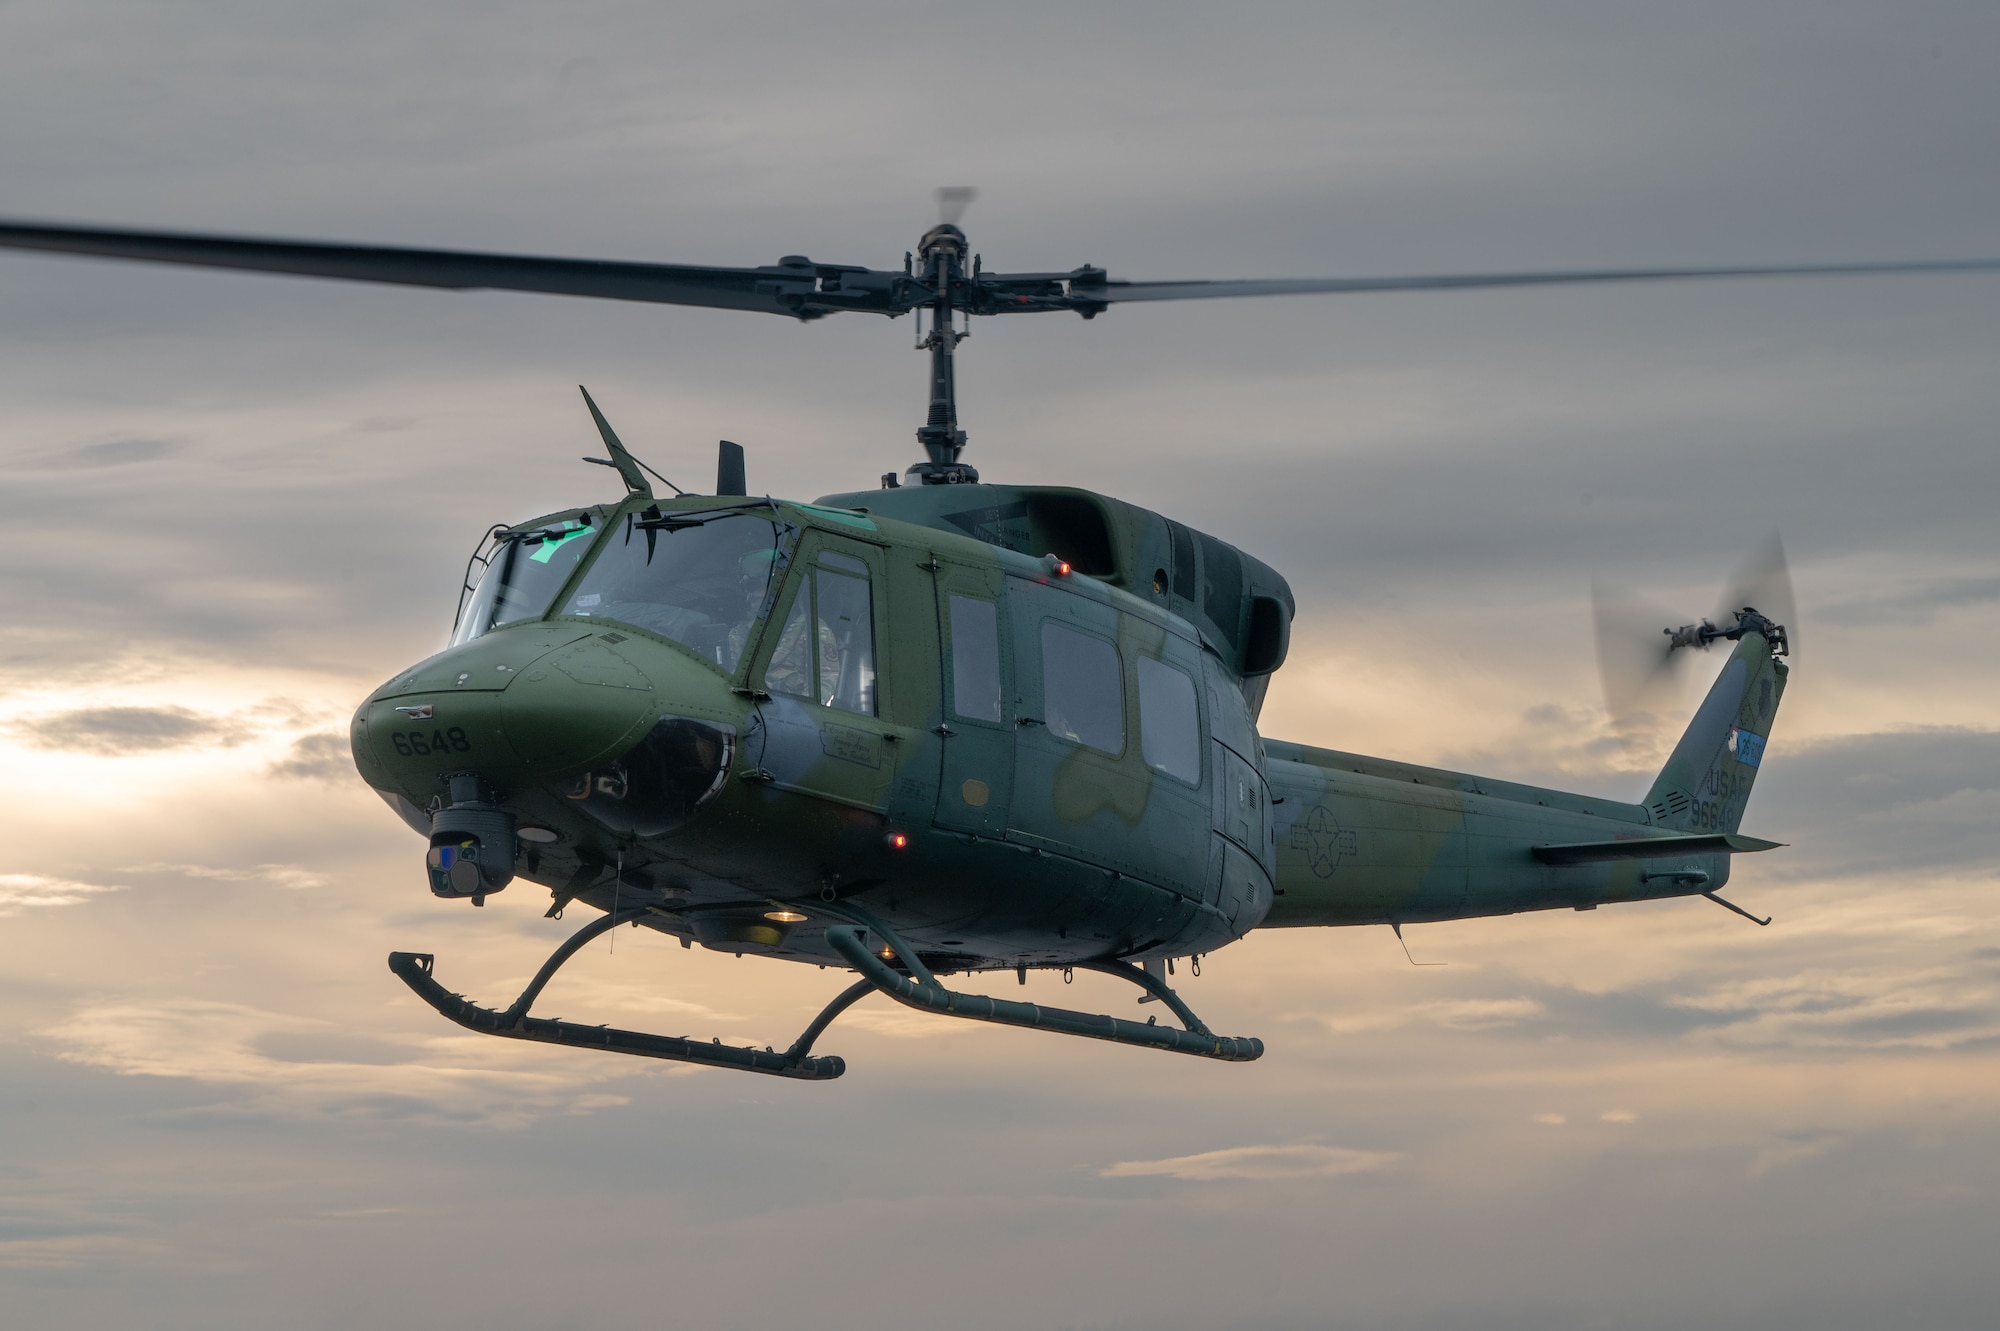 U.S. Air Force UH-1N Huey number 6648 assigned to the 36th Rescue Squadron hits the 20,000-hour flight mark at Fairchild Air Force Base, Washington, Jan. 13, 2023. The 36th RQS completed 759 flights in 2022, with its fleet of UH-1Ns averaging 18,000 hours total flight time. (U.S. Air Force photo by Airman 1st Class Stassney Davis)